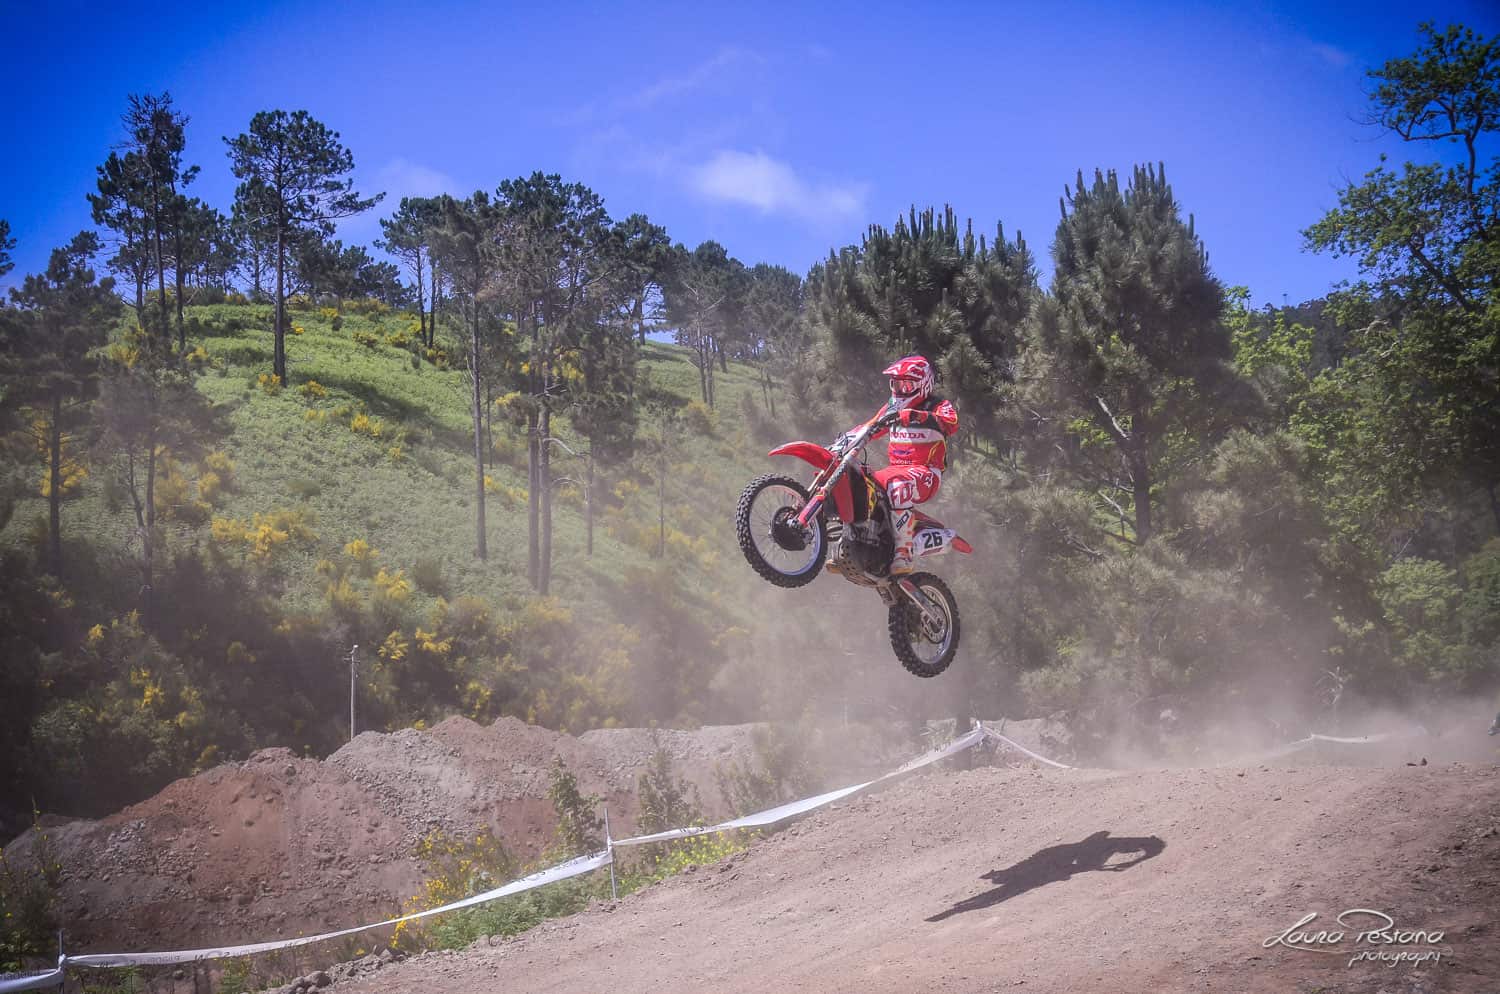 A Rider jumping with his bike